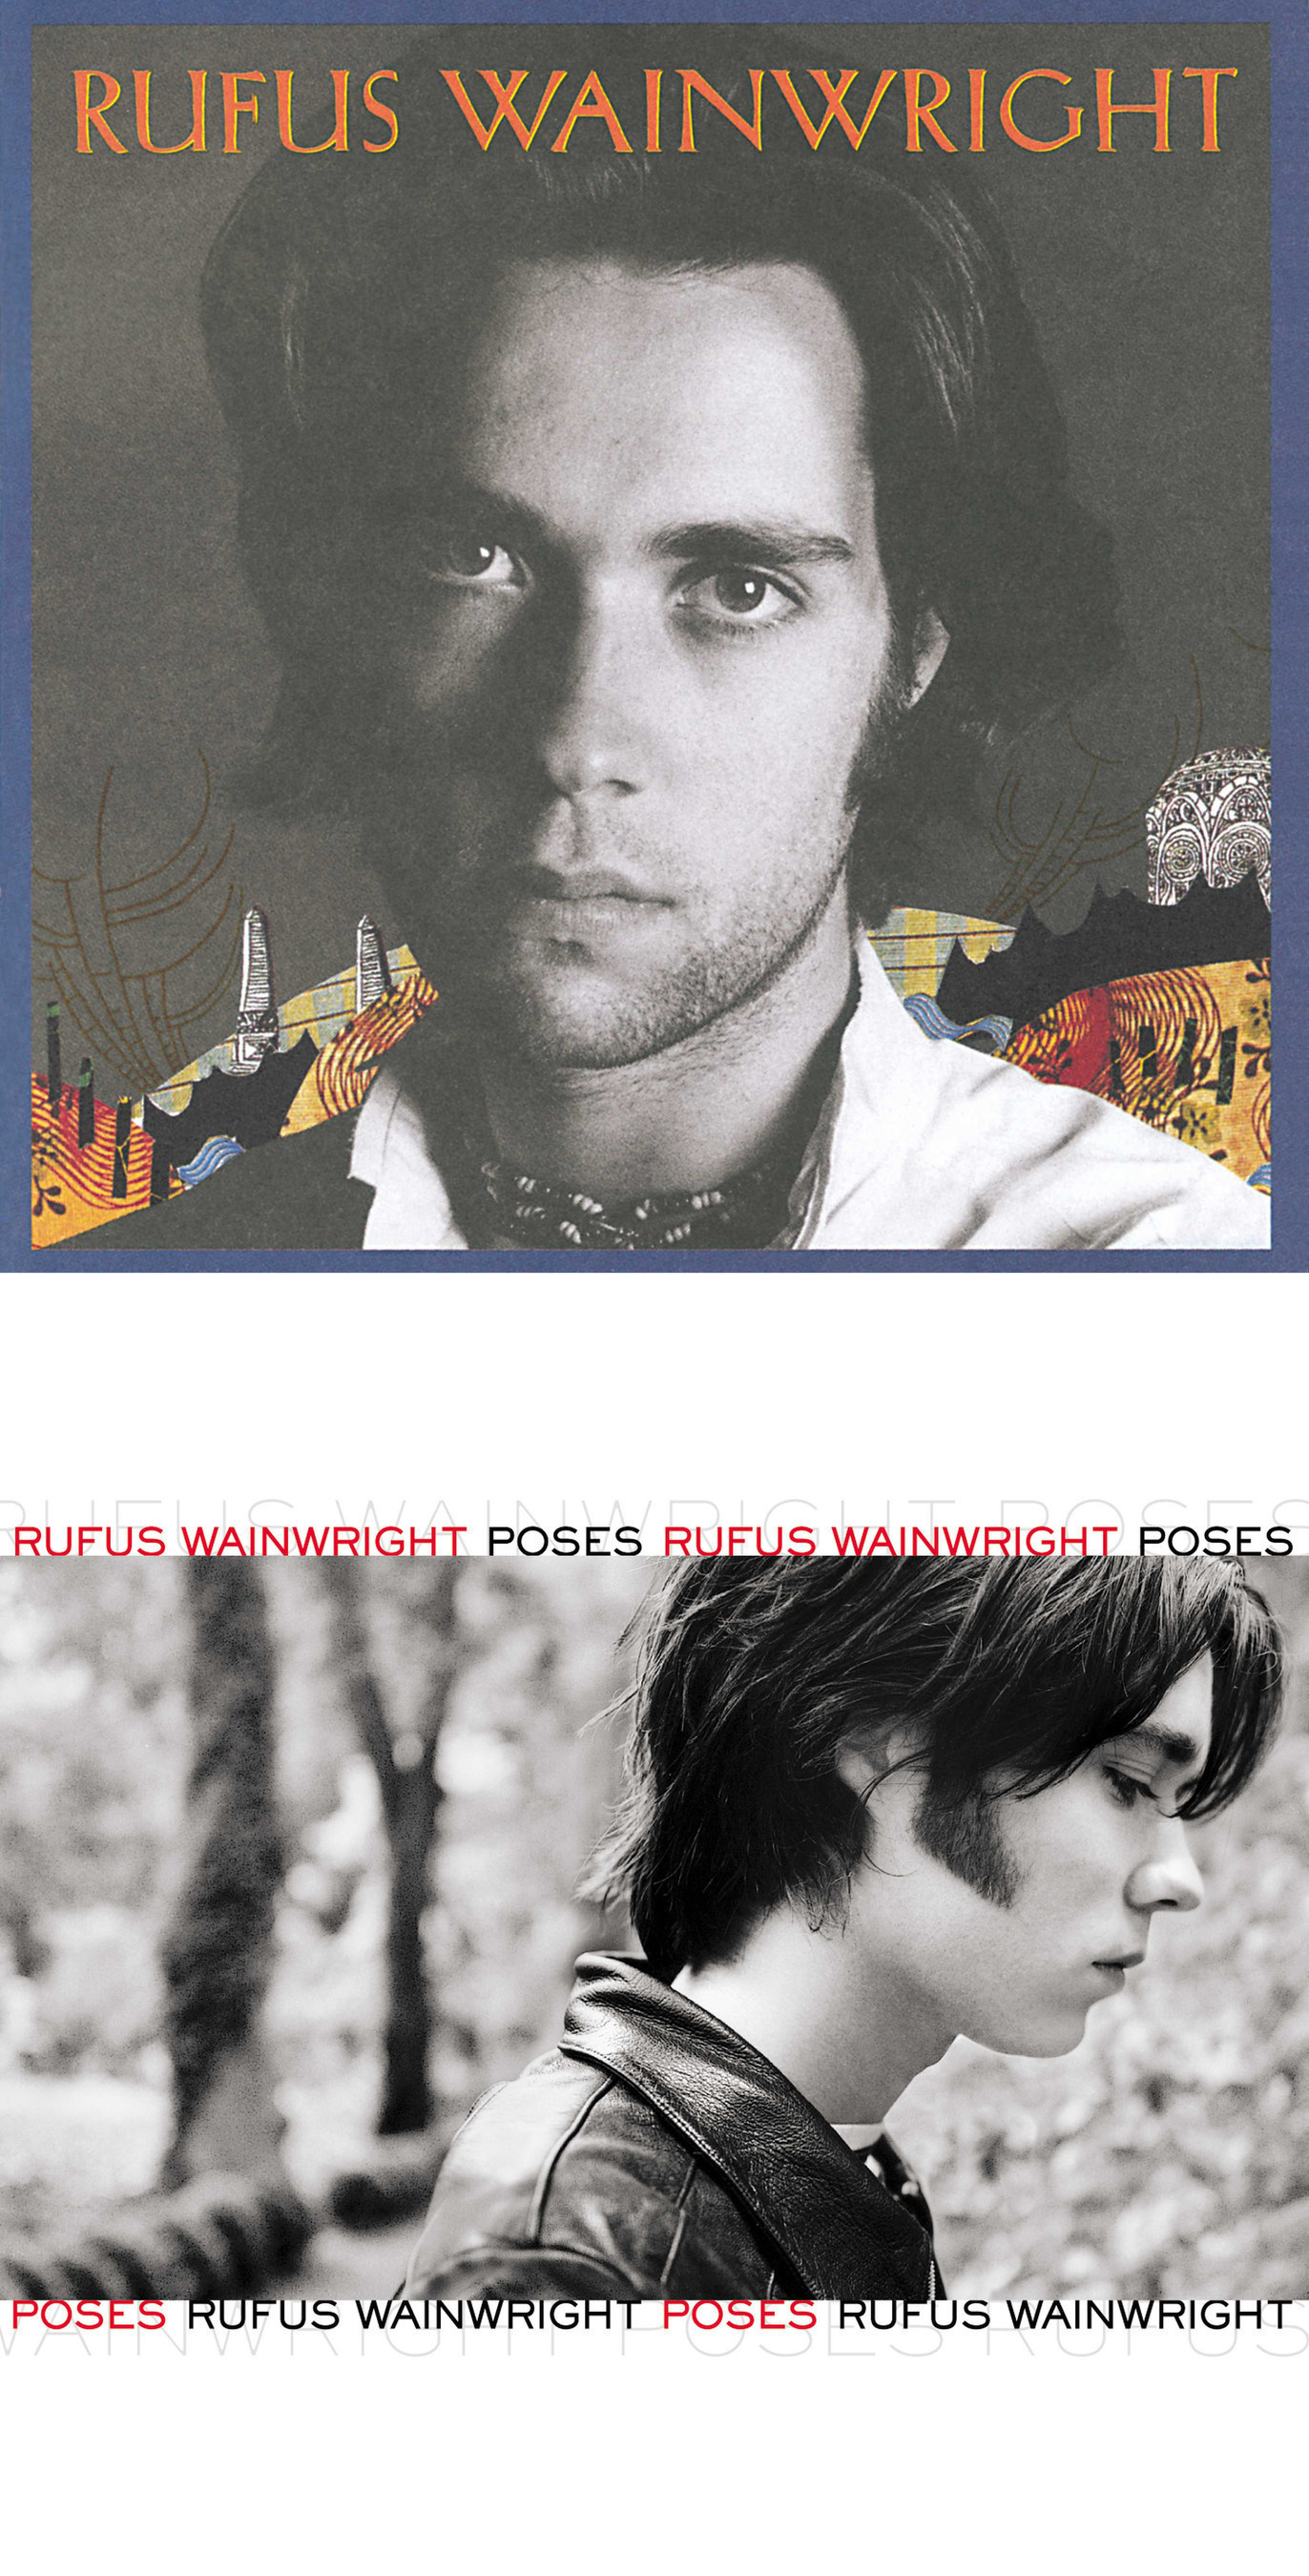 Rufus Wainwright's acclaimed debut album, 'Rufus Wainwright,' and his sophomore album, 'Poses,' will each be released in 2LP vinyl editions in gatefold packaging on May 6 by Geffen/UMe. Recognized by Rolling Stone as one 1998's best albums, 'Rufus Wainwright' is highly sought after on vinyl, as it has never been widely released on LP. Selected by NME as a Top 10 album of 2001, 'Poses' features "Cigarettes and Chocolate Milk" and Wainwright's stirring cover of Lennon/McCartney's "Across The Universe." The 2LP release of 'Poses' marks the album's vinyl debut worldwide.